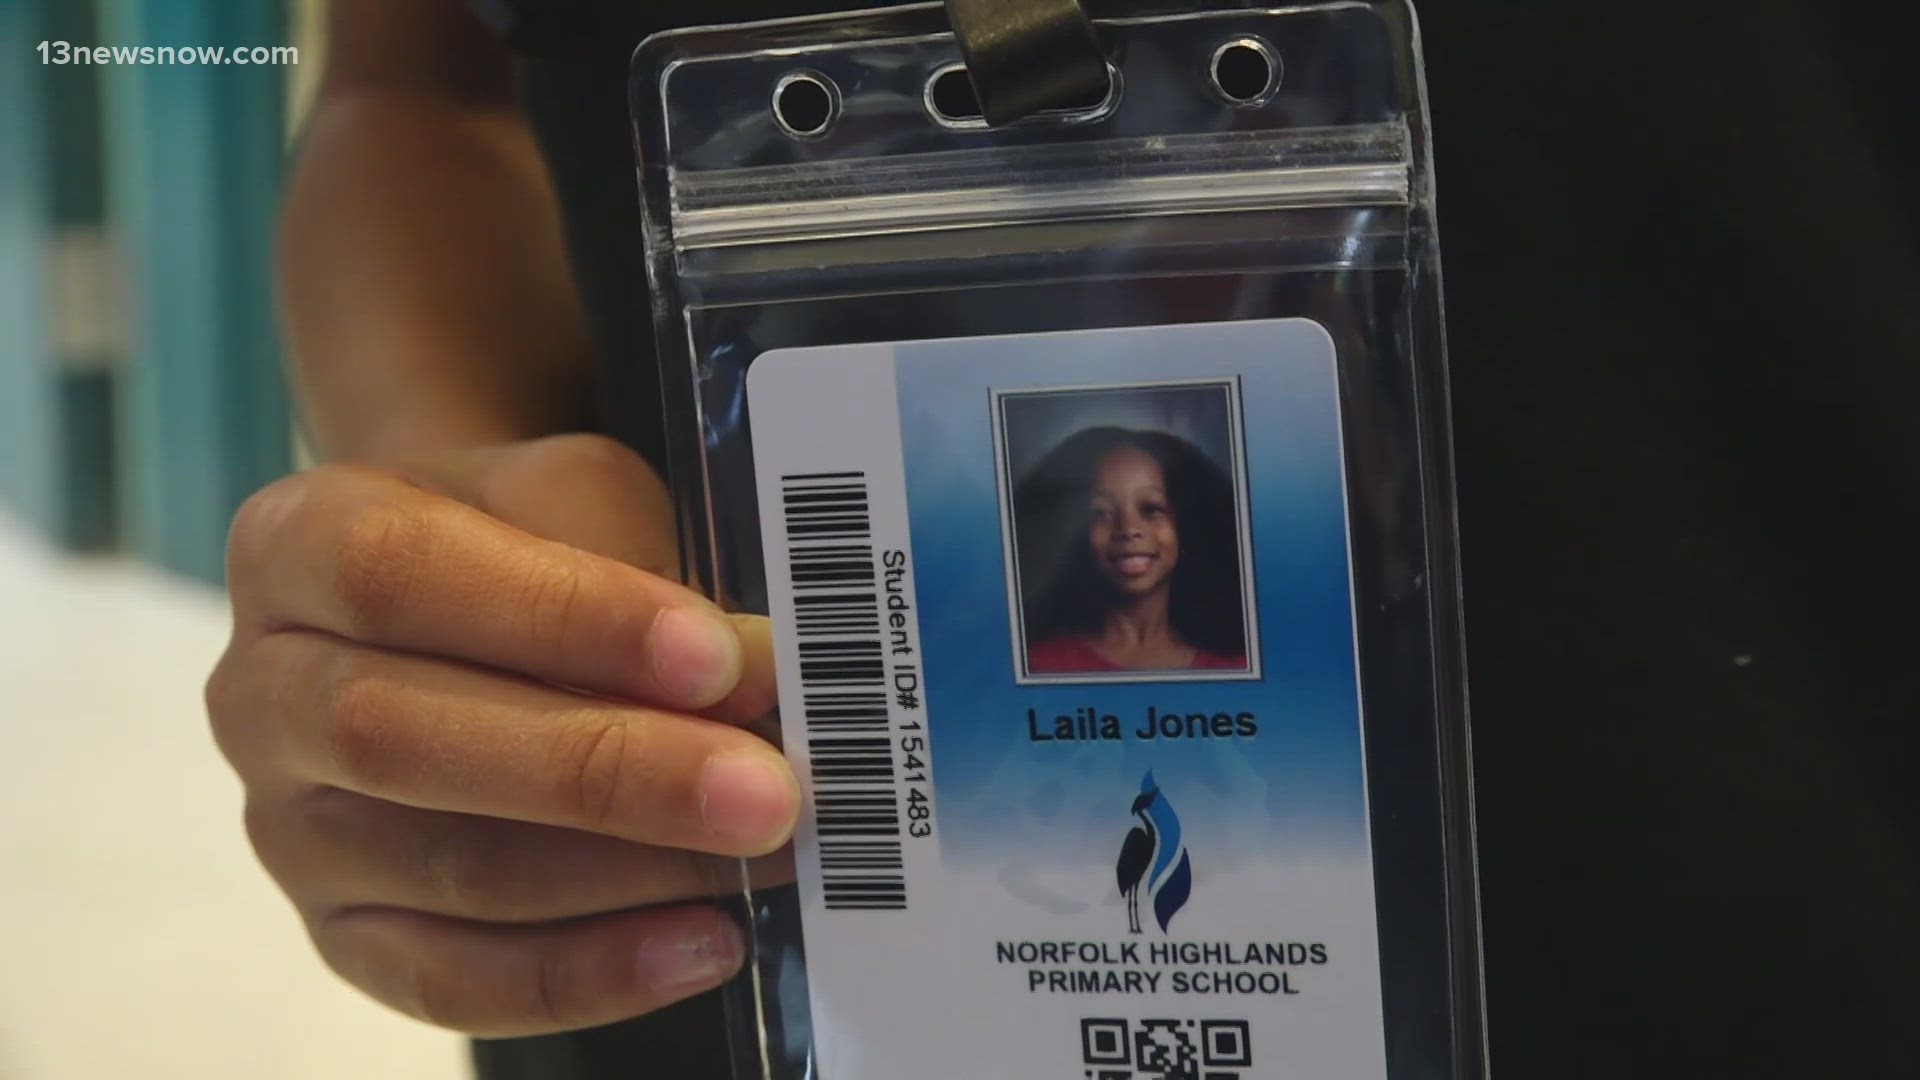 In Chesapeake, school administrators are rolling out new ID badges meant to add an extra layer of security.